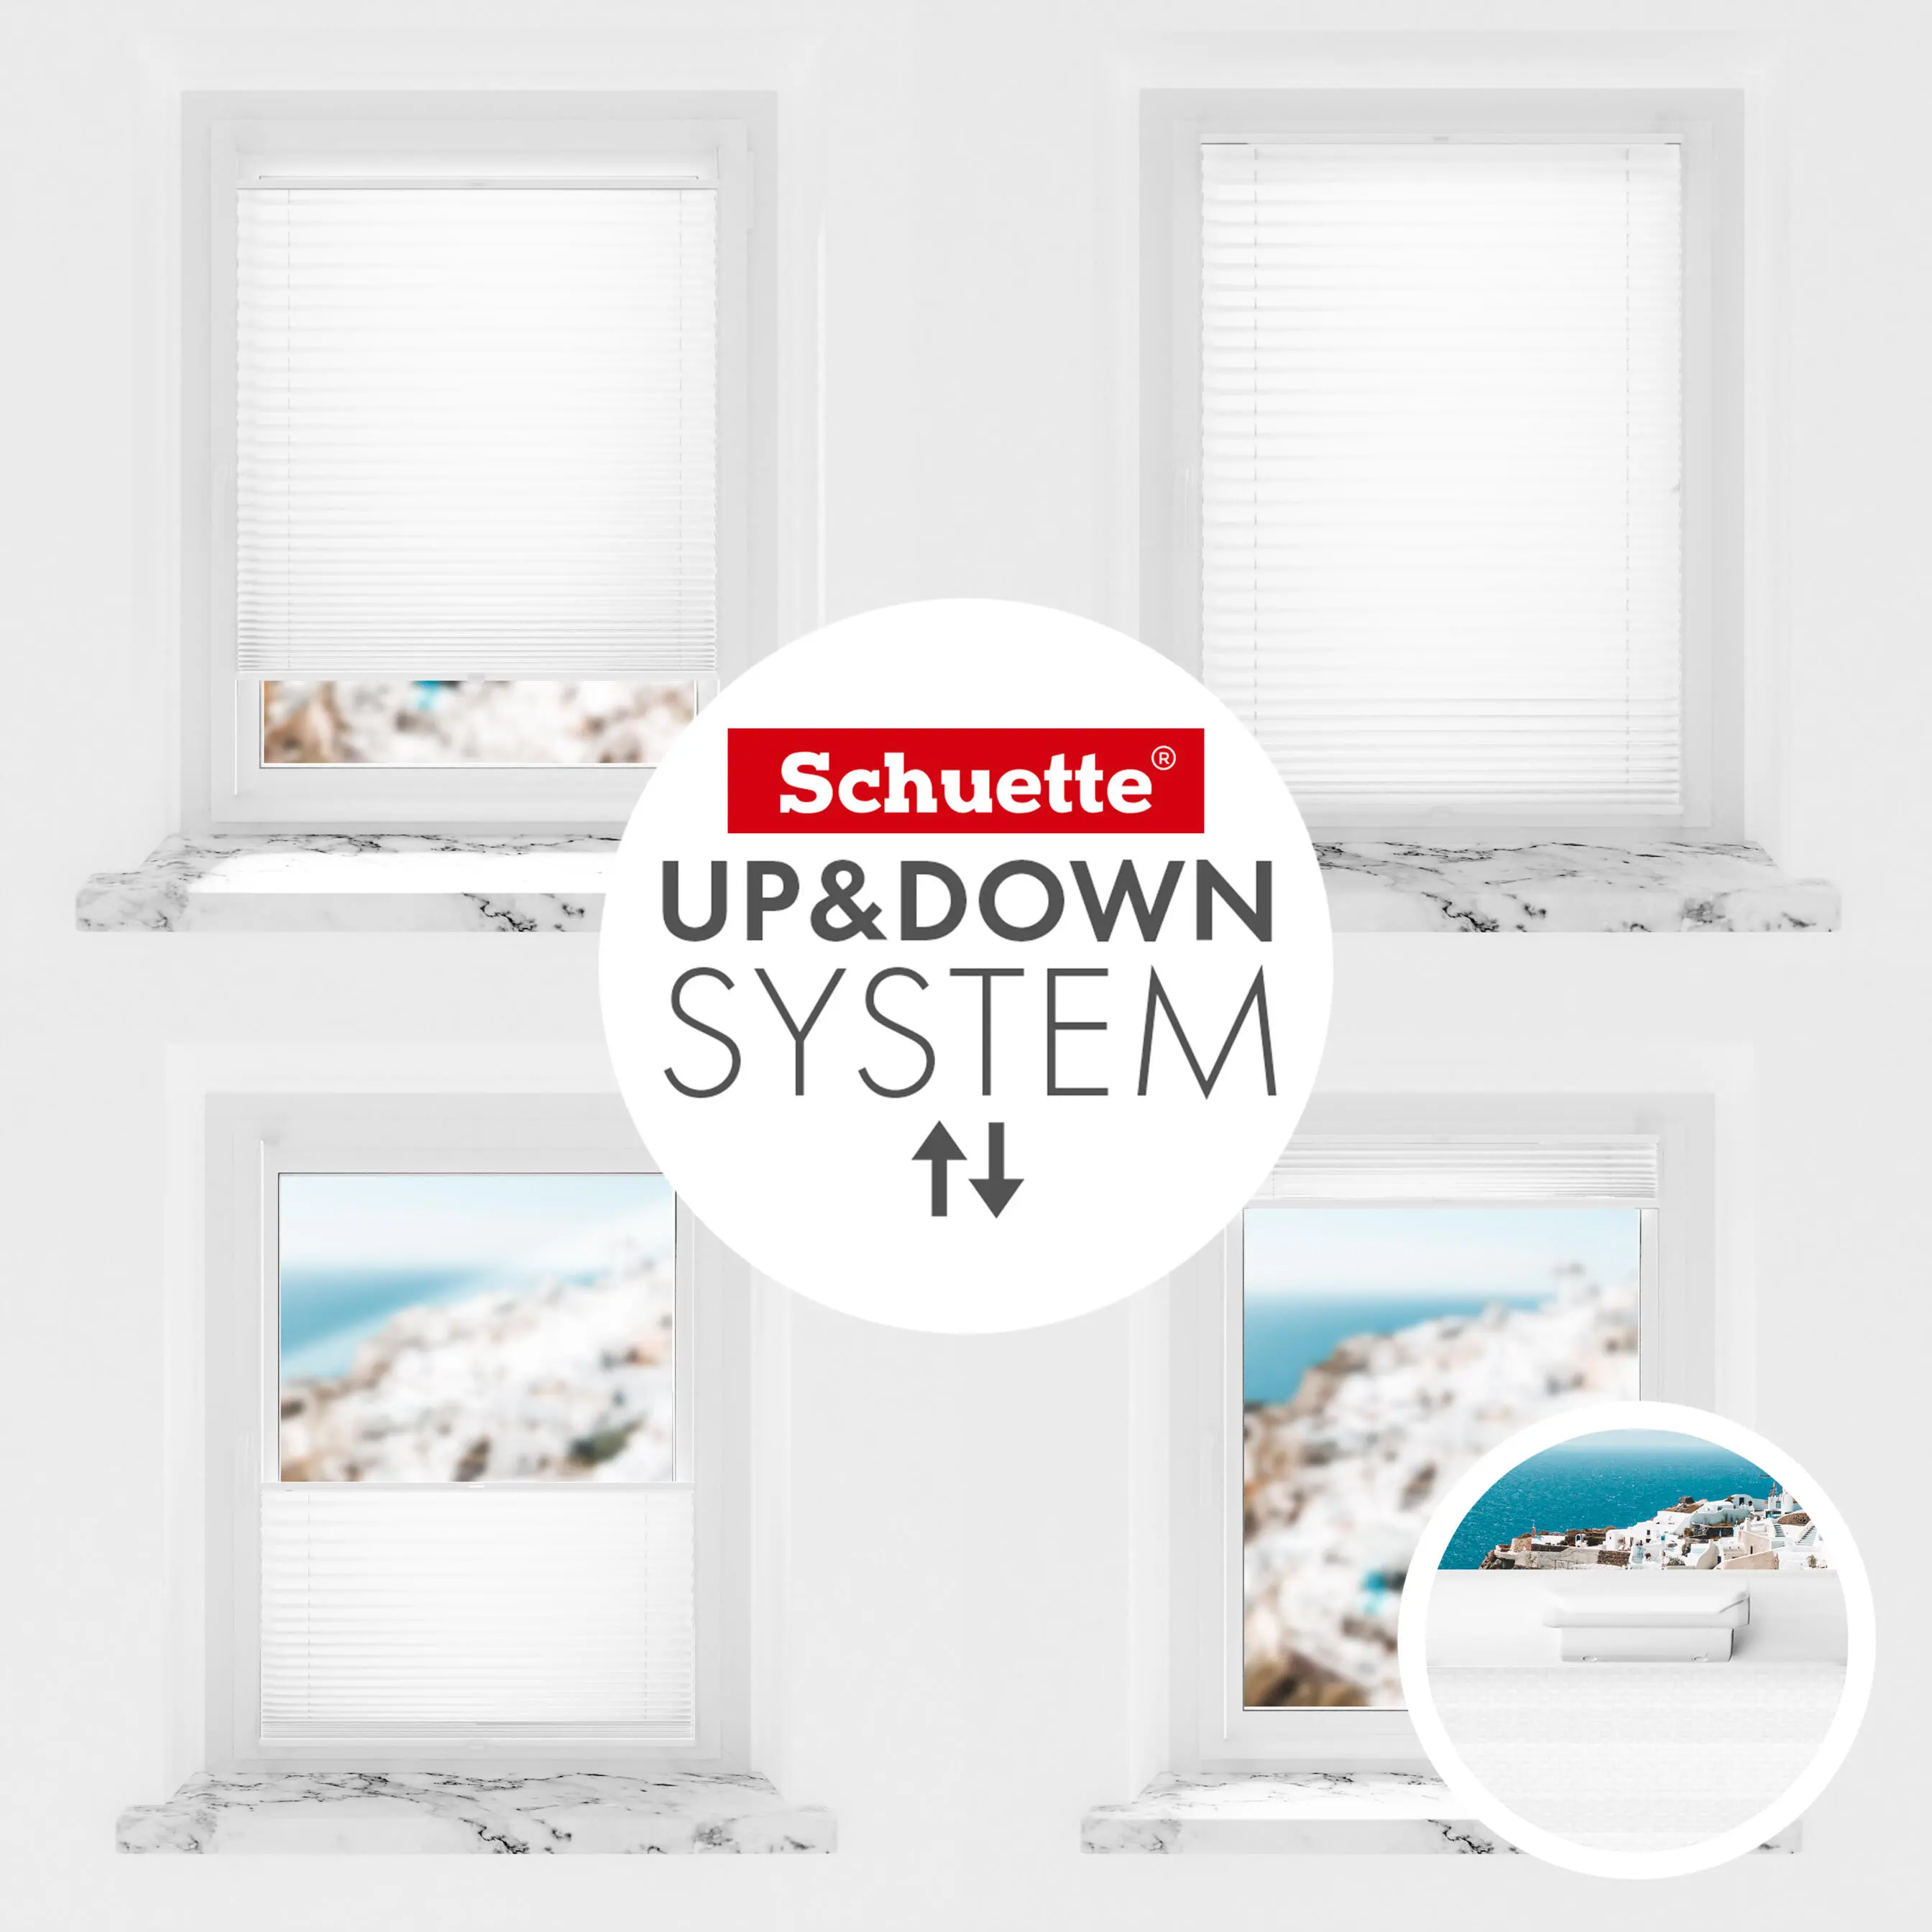 Schuette Up&Down System